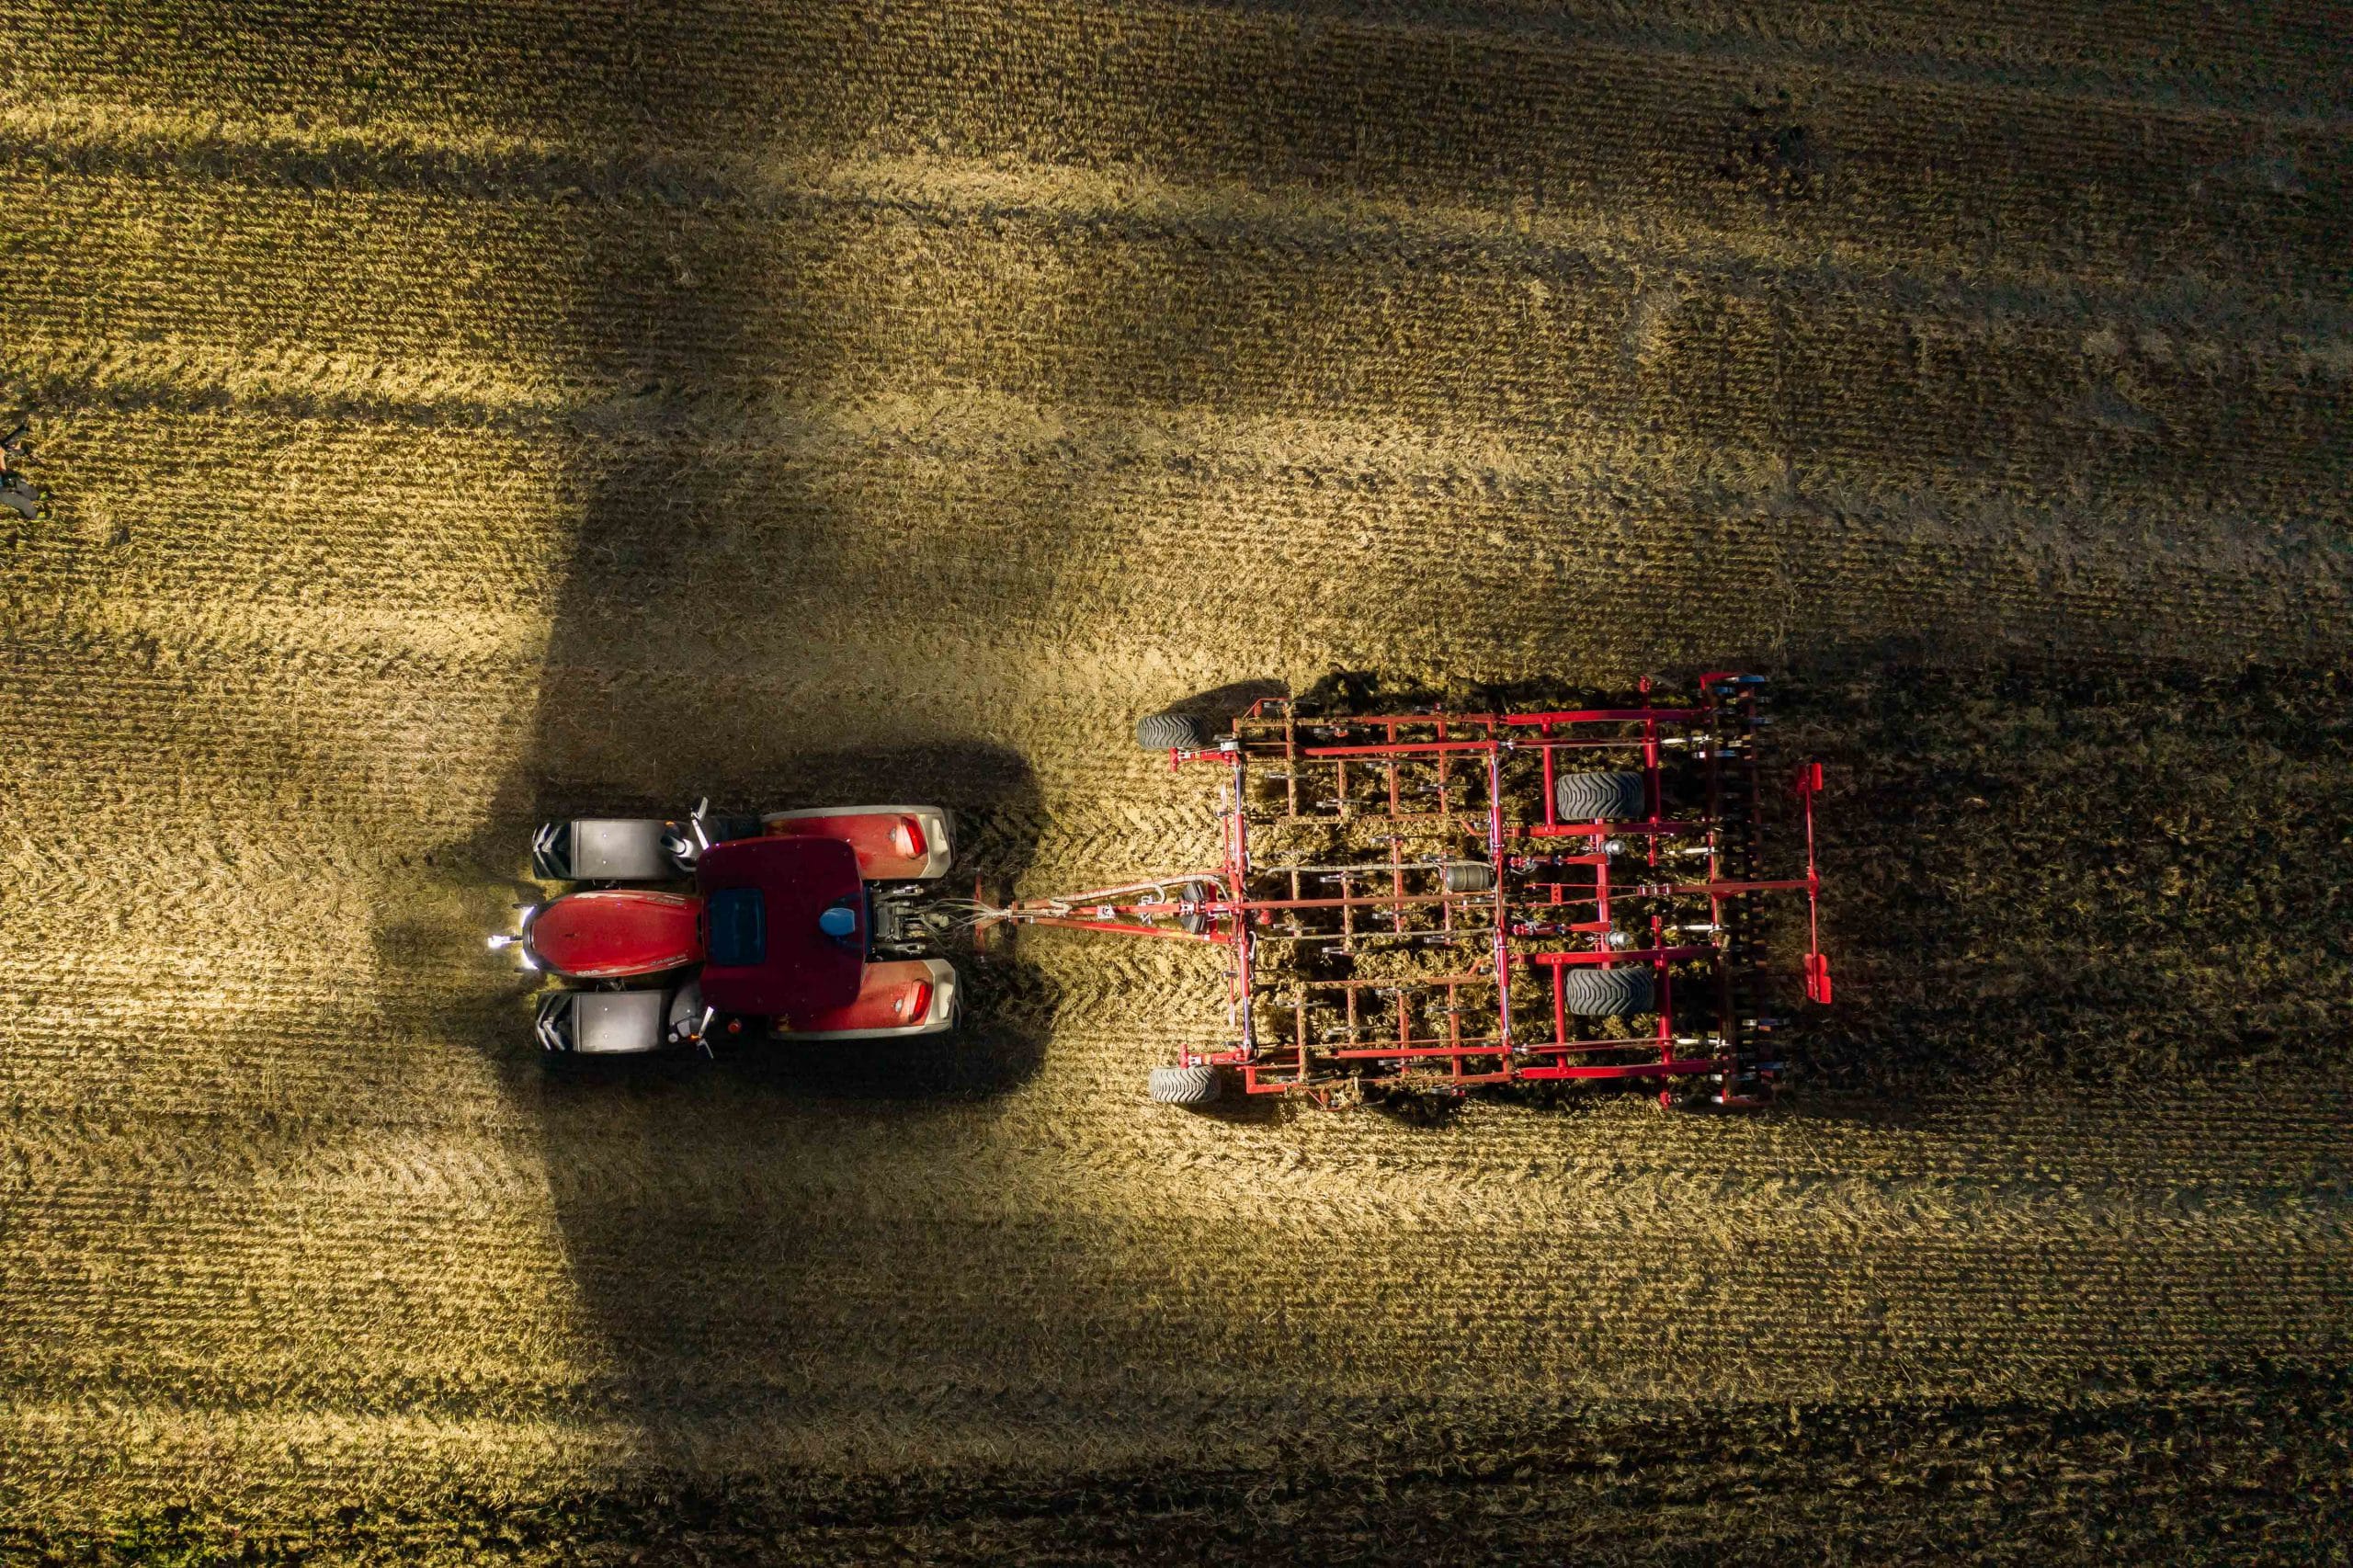 CASEIH_OPTUM_AFS_CONNECT_TILLAGE_AREALVIEW_593217